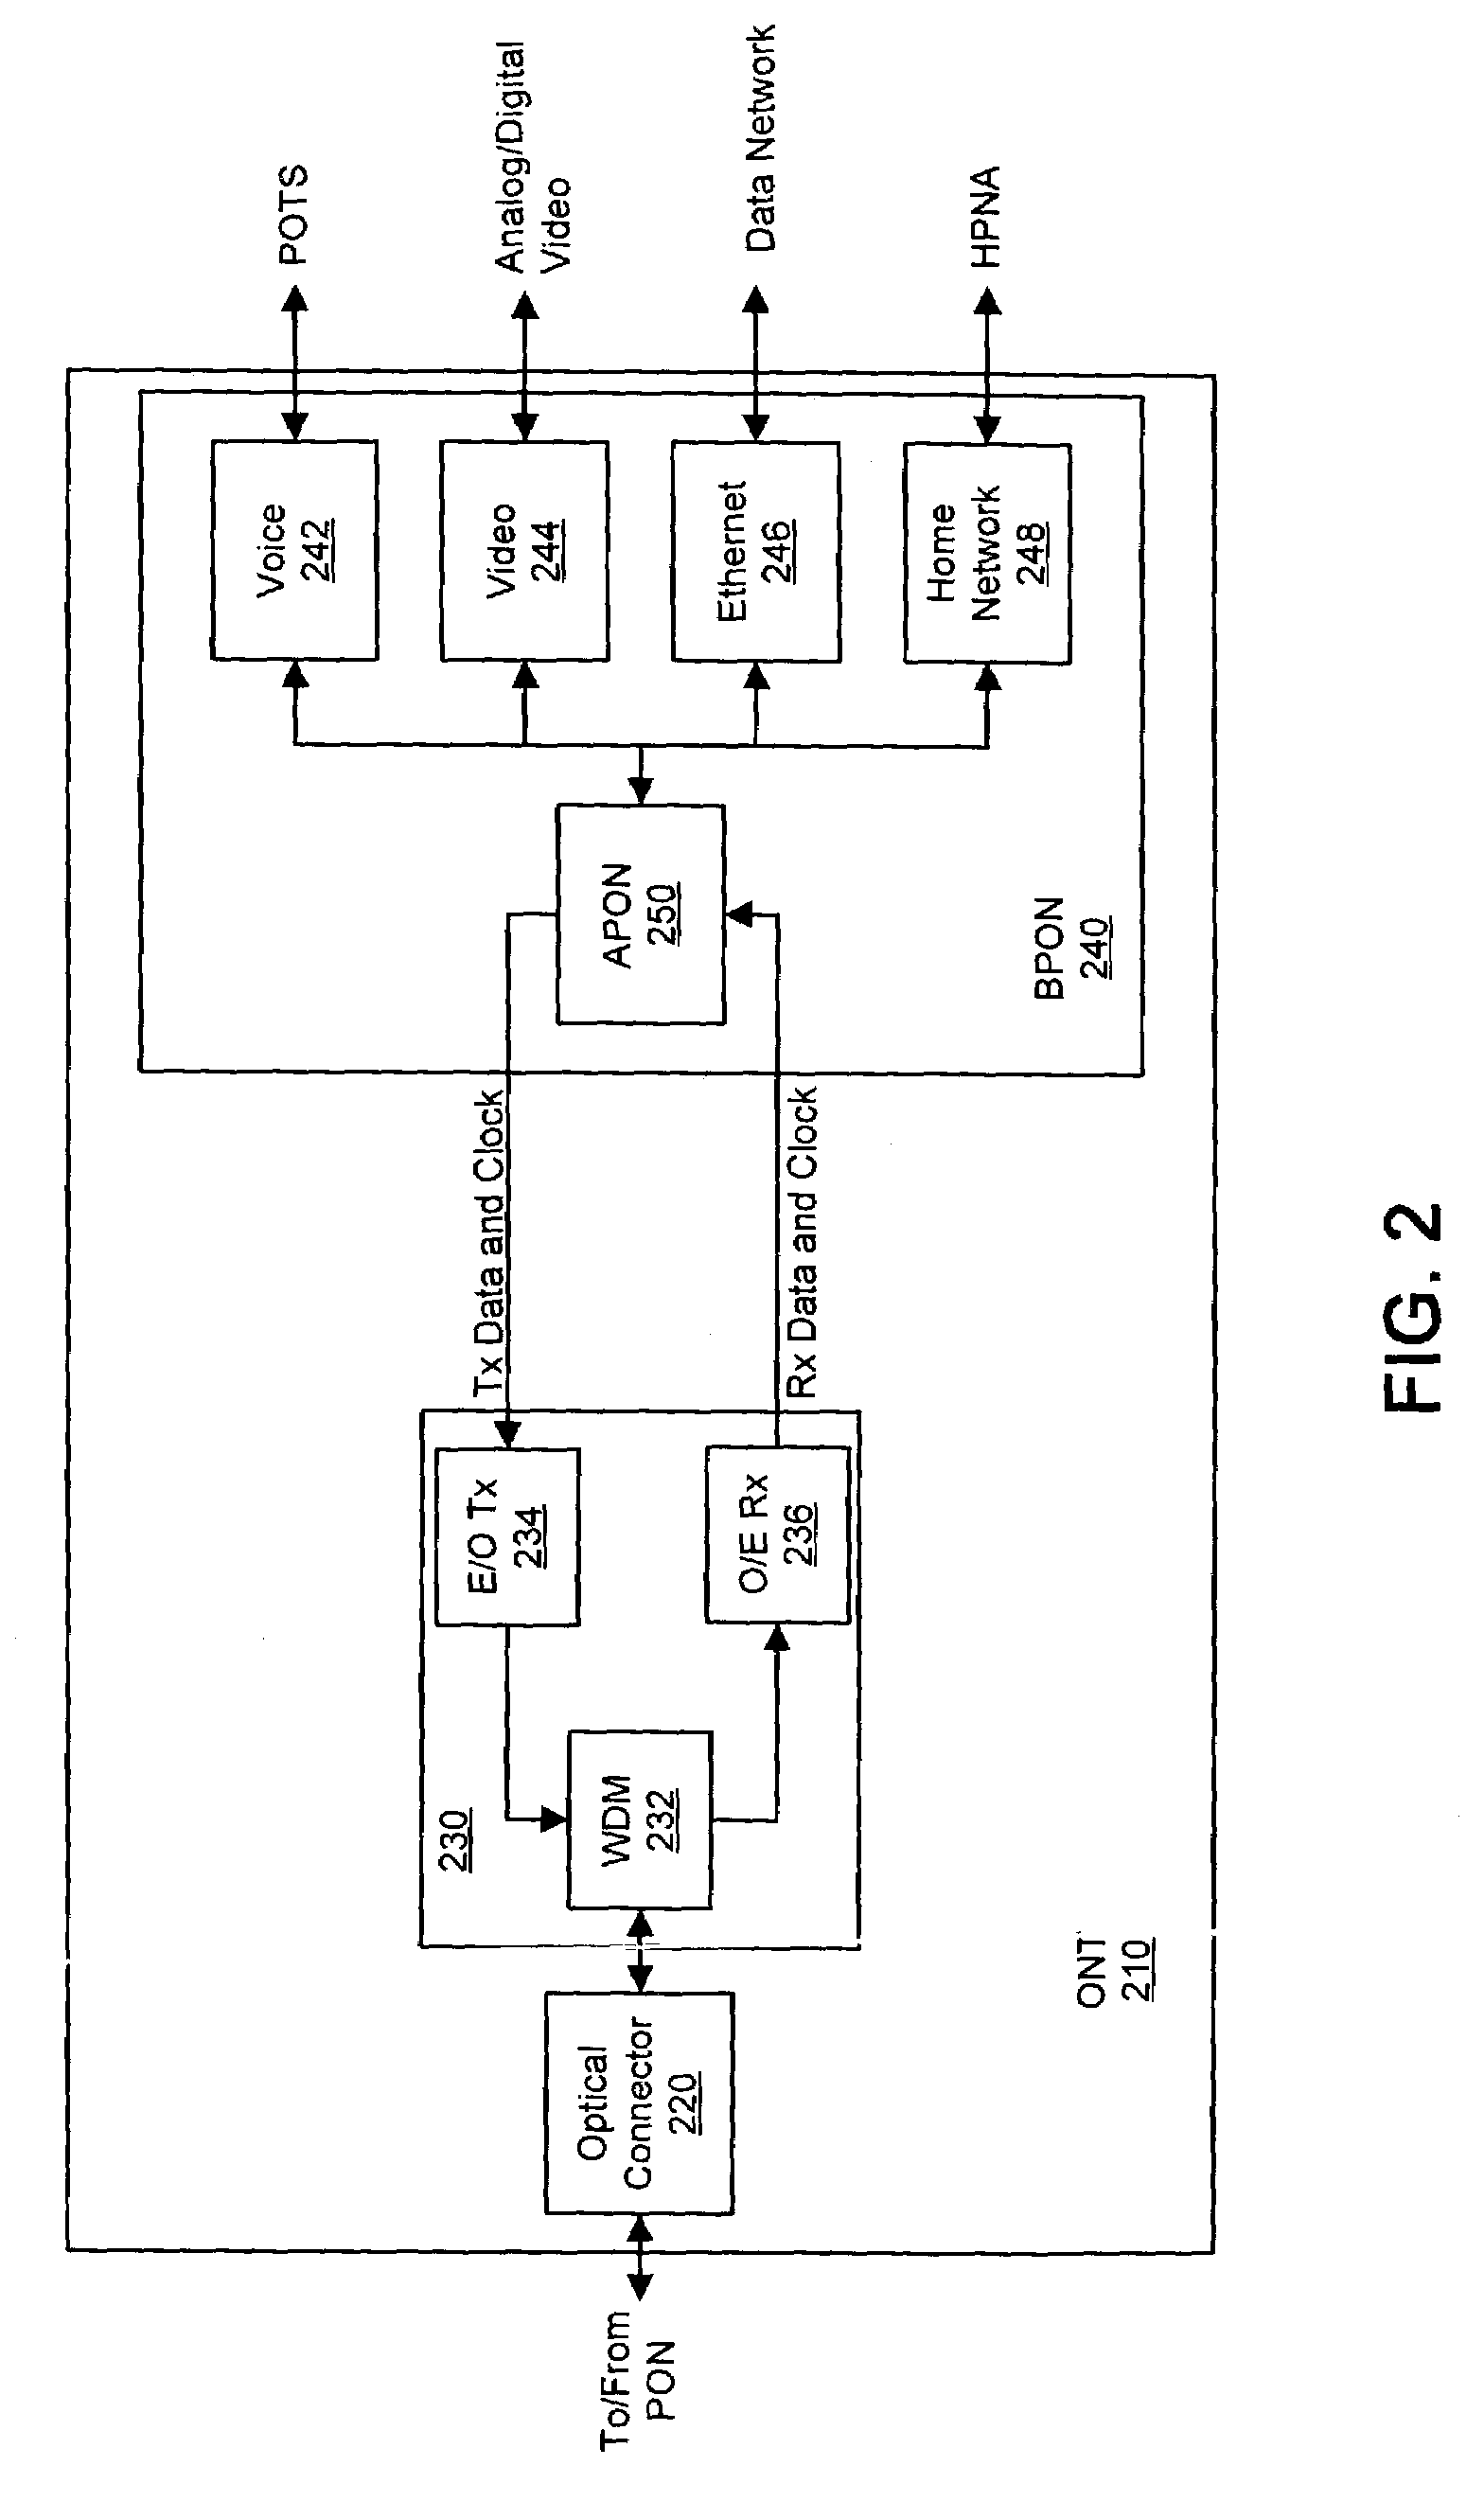 System and method for dynamic bandwidth allocation on PONs